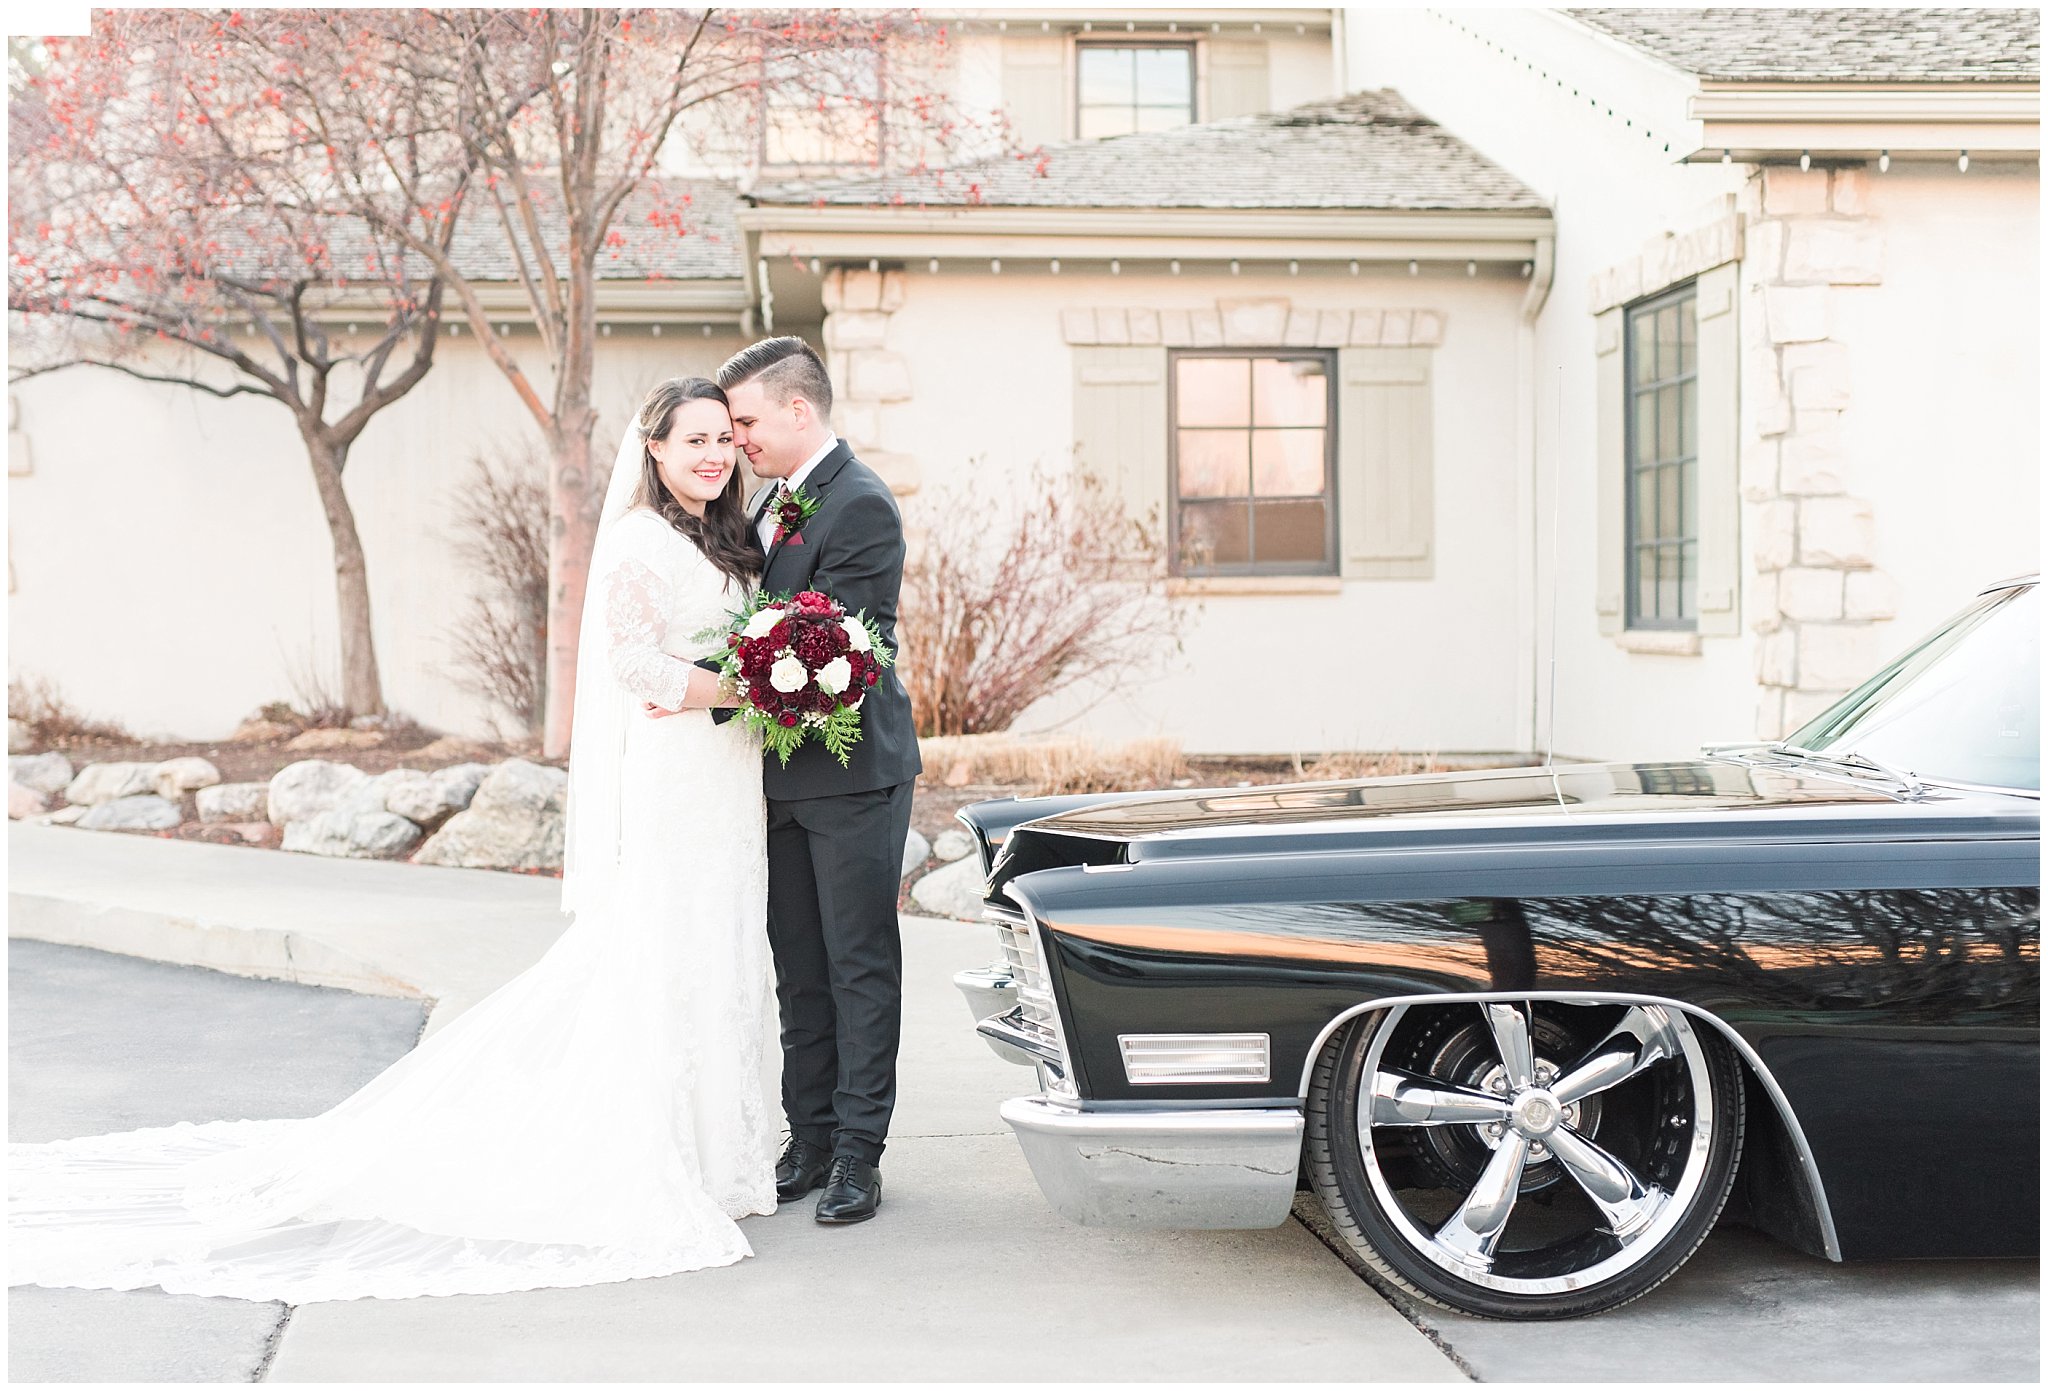 Bride and Groom with 1967 Cadillac classic car wedding day portraits | Oquirrh Mountain Temple and Gardner Village Wedding | The Gathering Place | Jessie and Dallin Photography